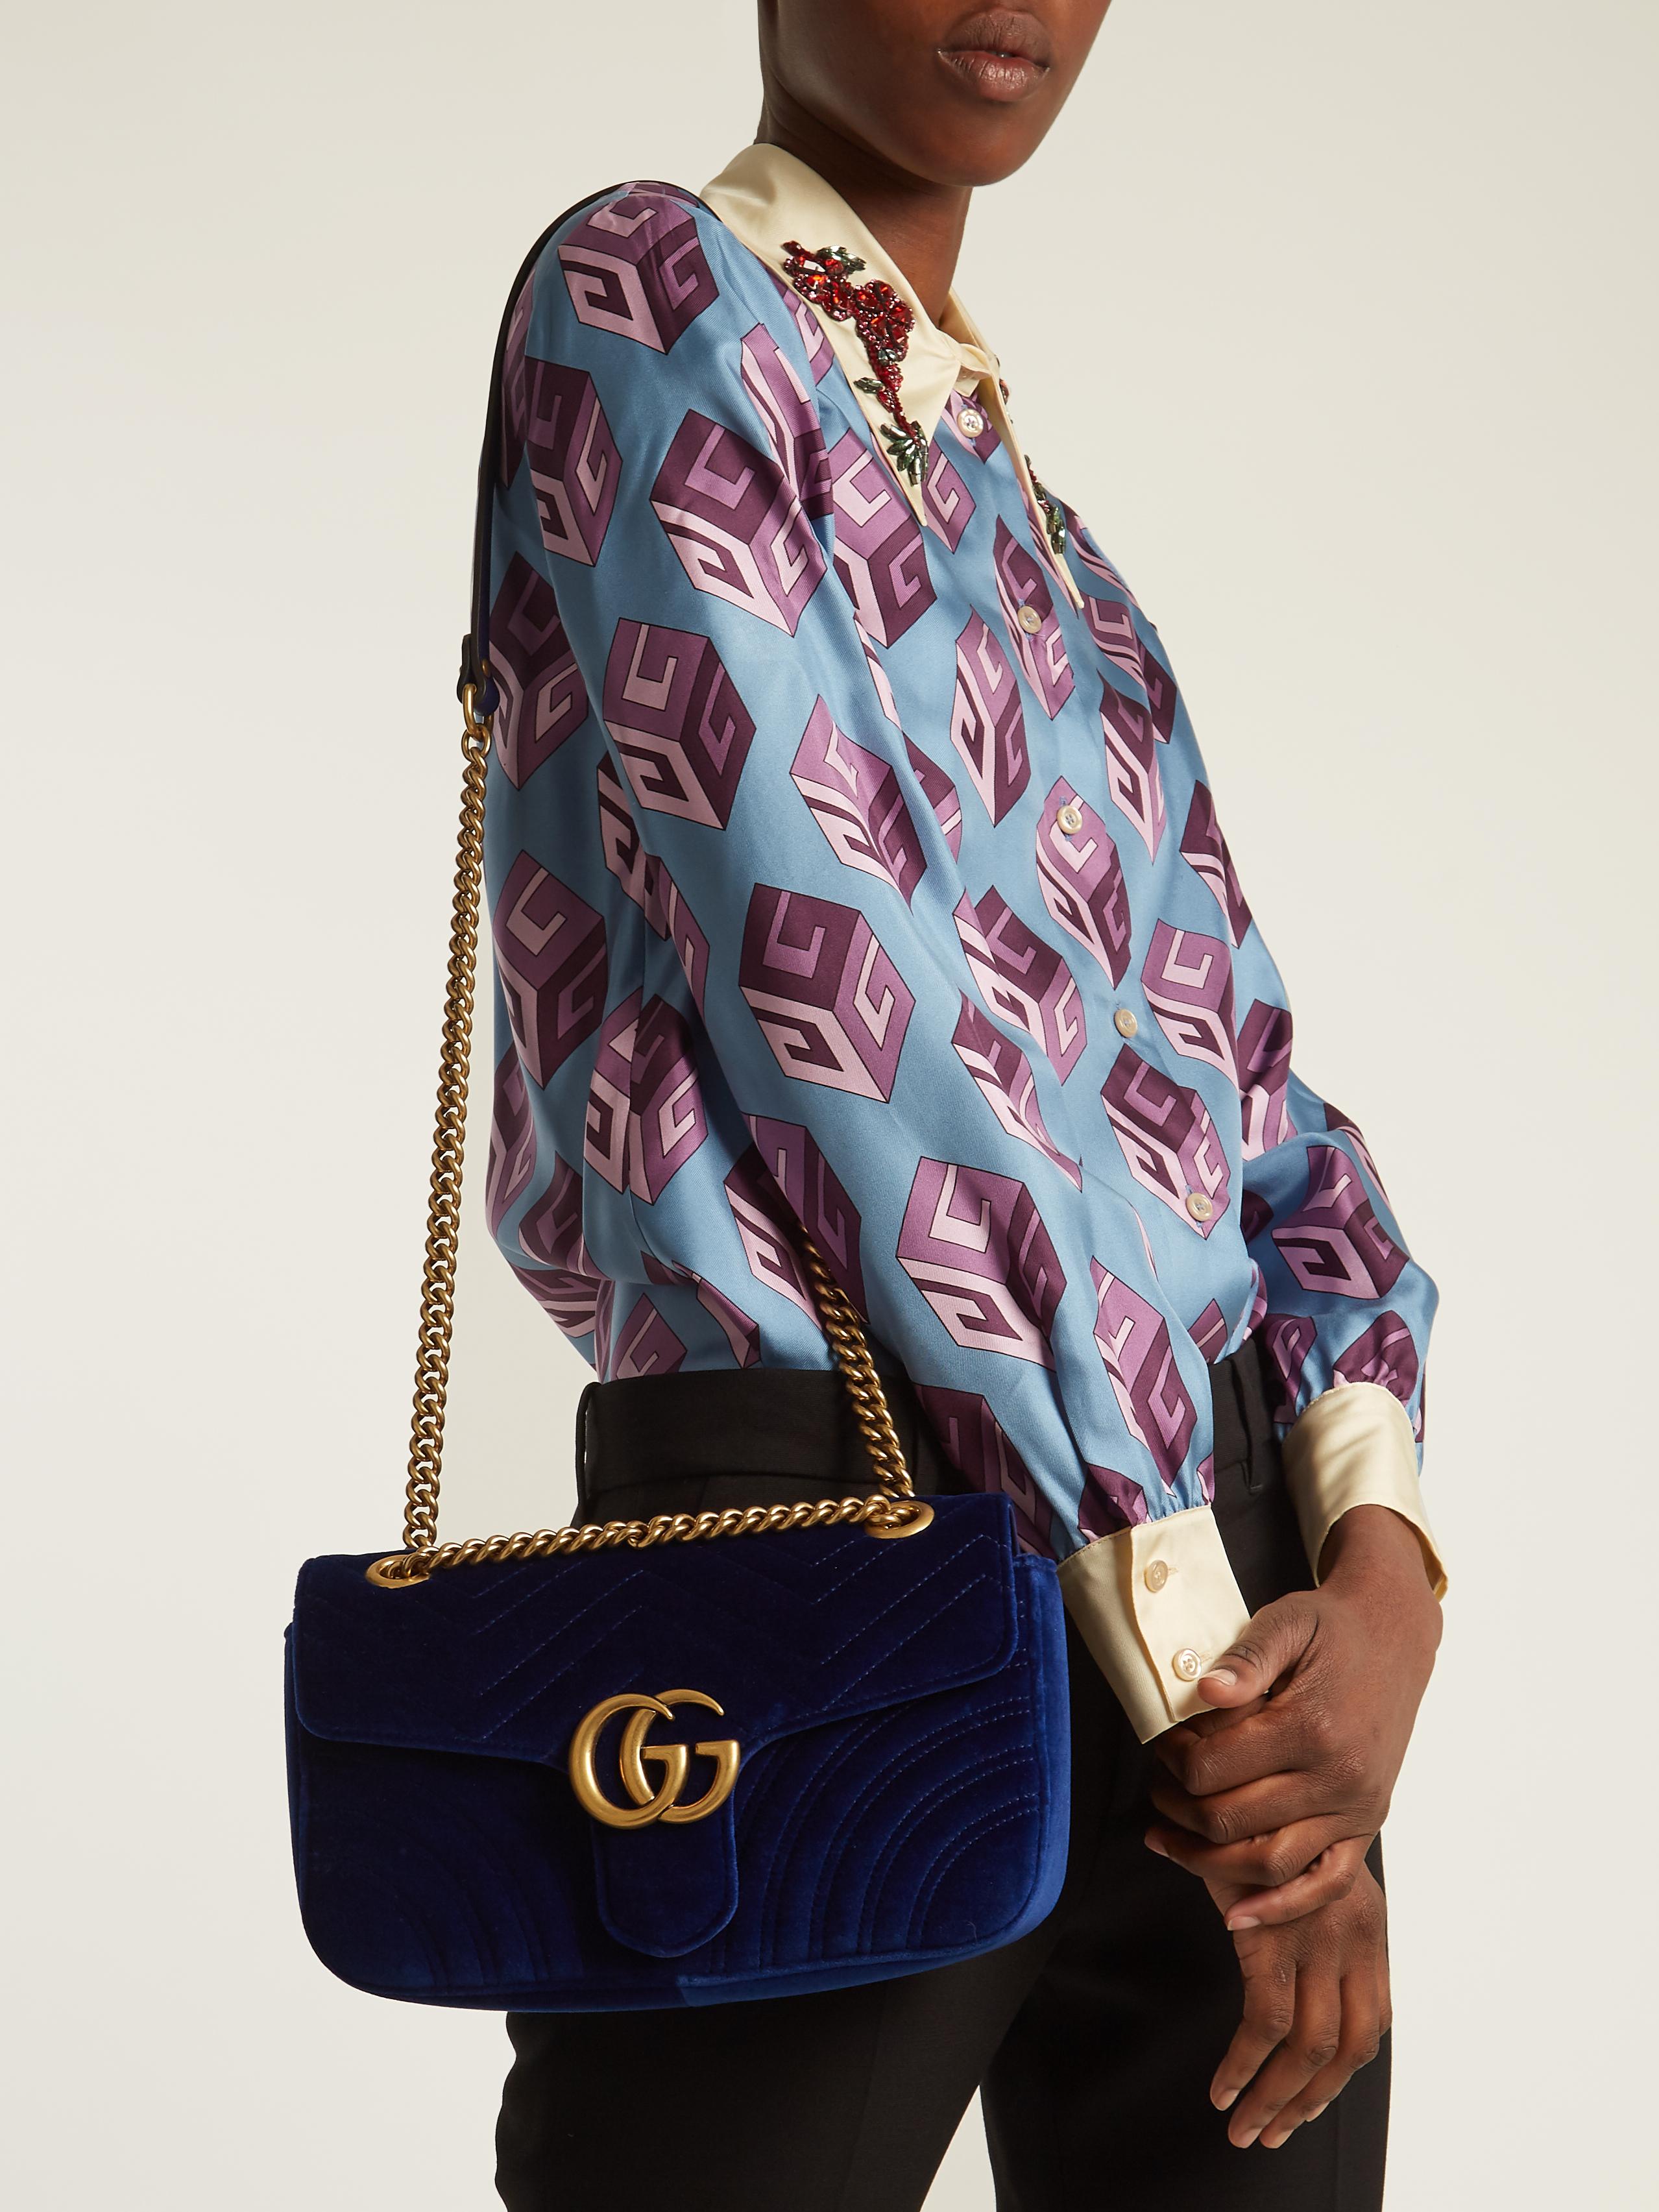 Gucci Gg Marmont Quilted-velvet Cross-body Bag in Dark Blue (Blue) - Lyst